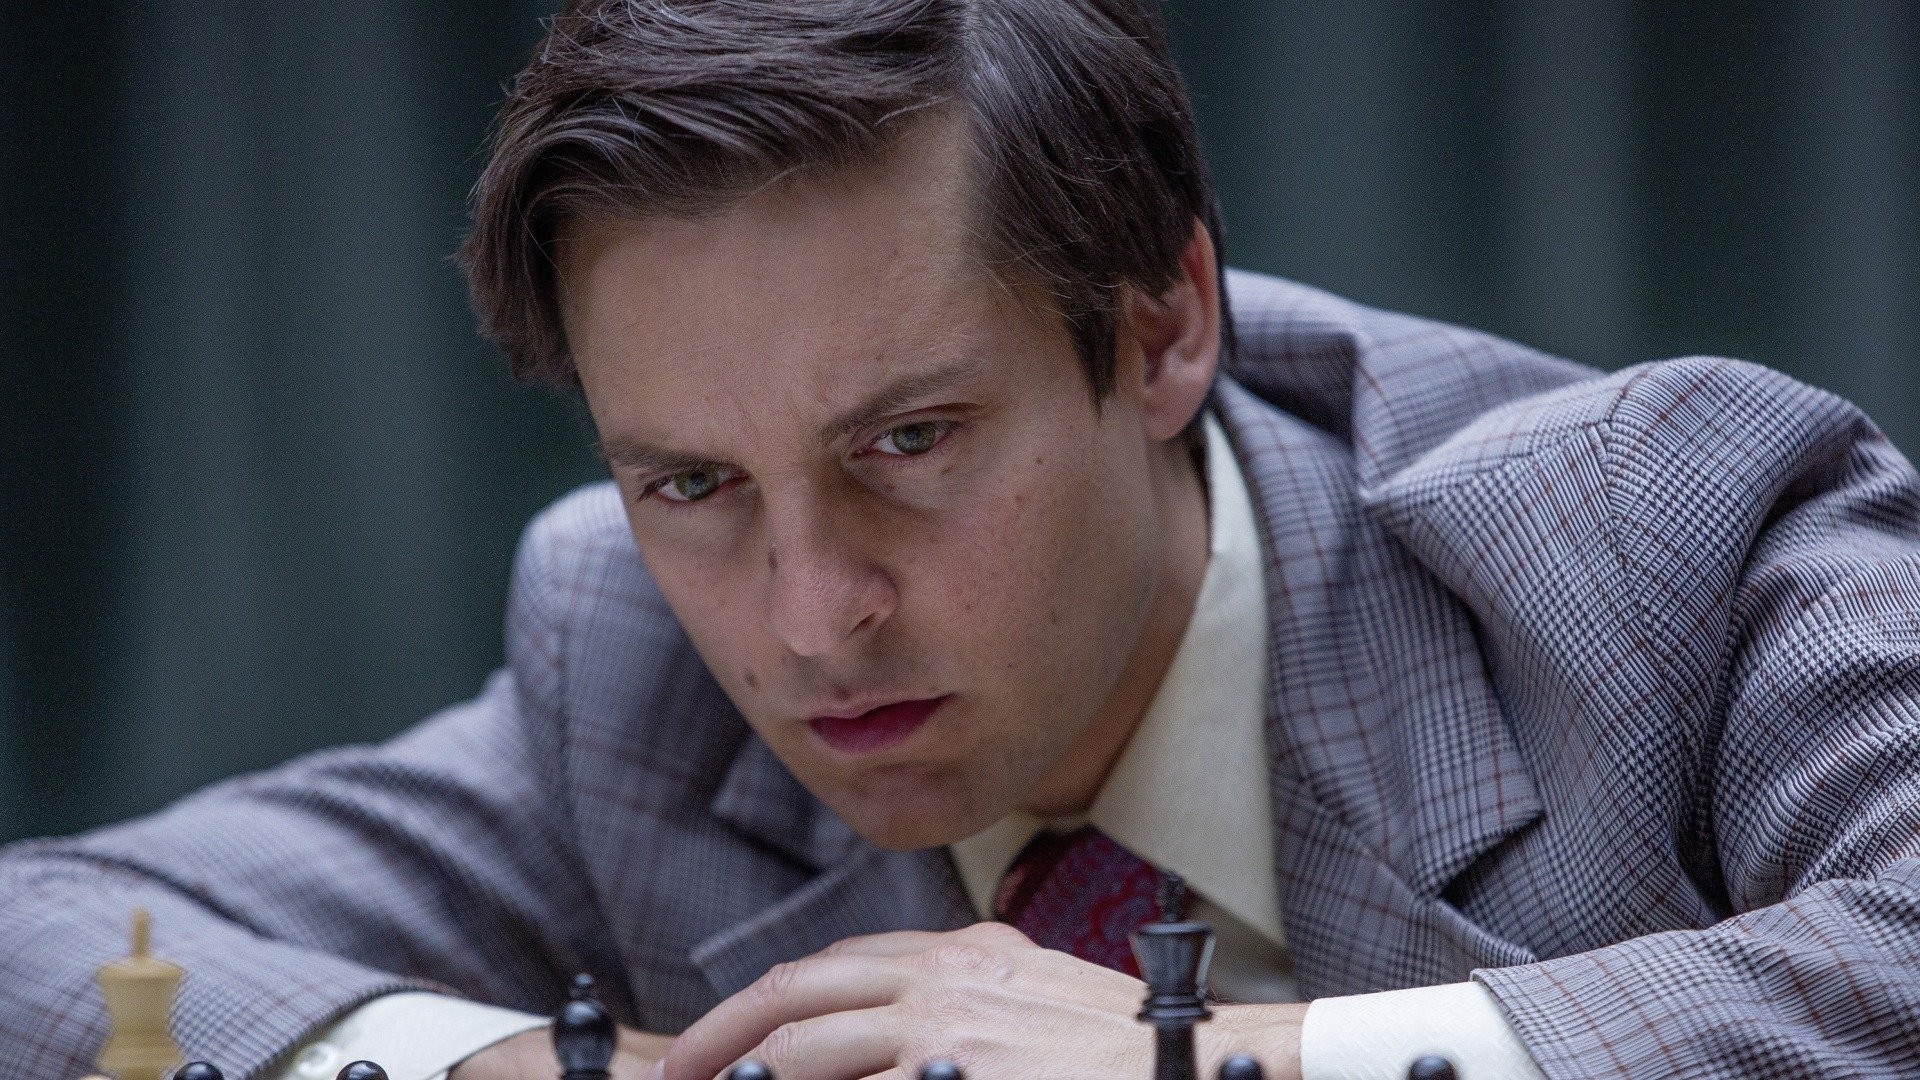 Pawn Sacrifice: For Queen, Rook, Self, and Country - MovieManifesto